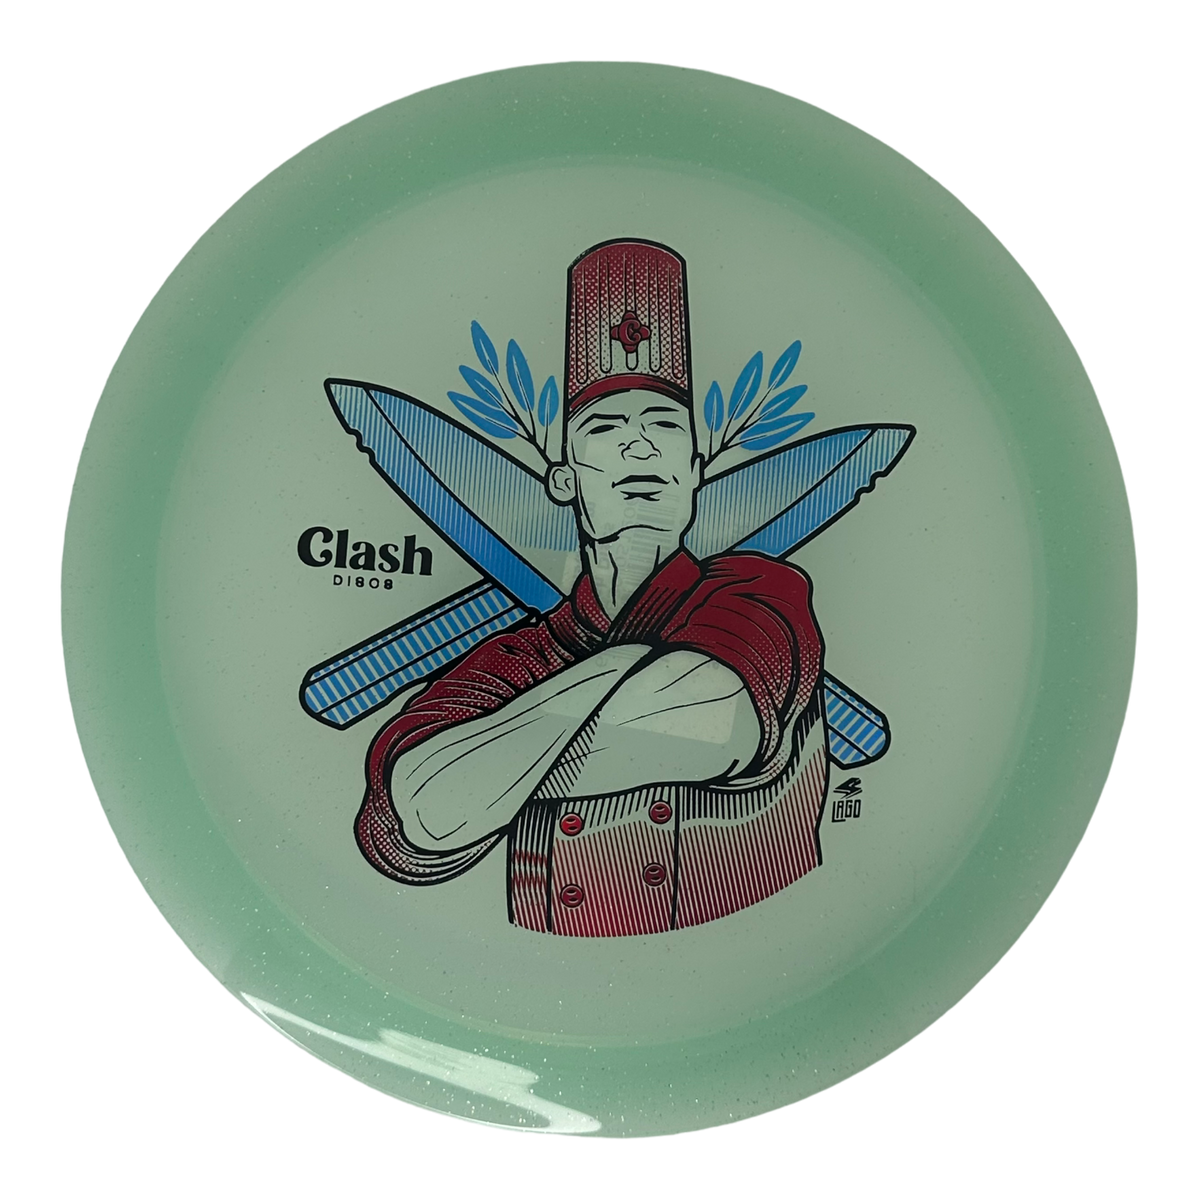 Clash Discs Steady Ginger - Chef Stamp